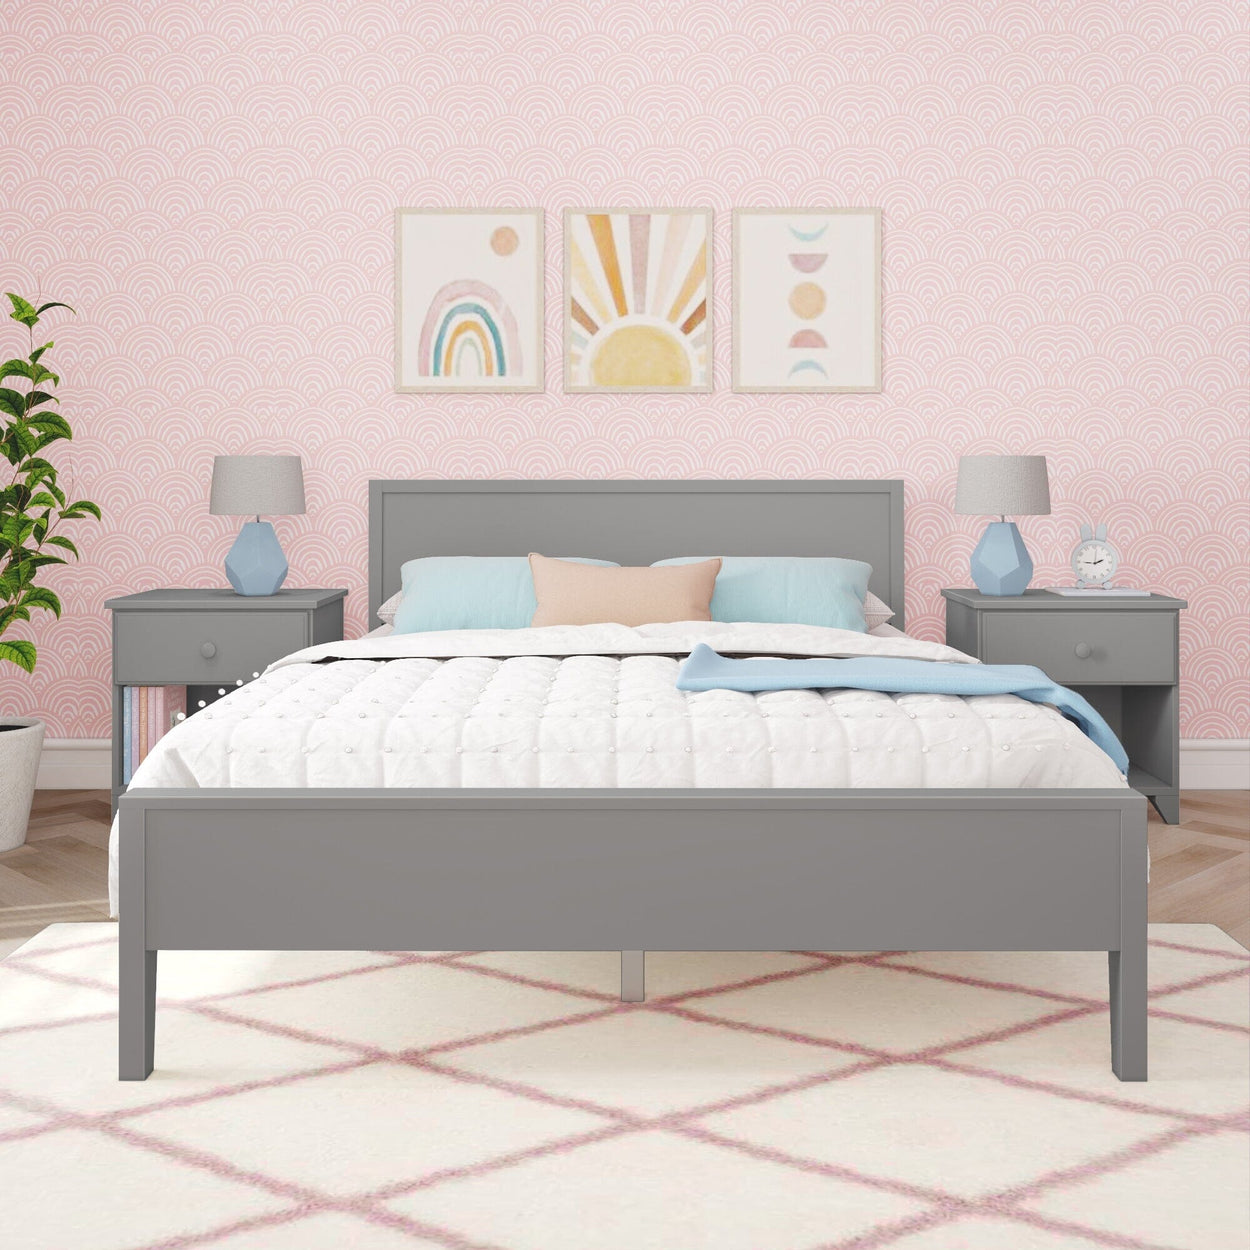 181102-121 : Kids Beds Classic Queen-Size Bed with Panel Headboard, Grey